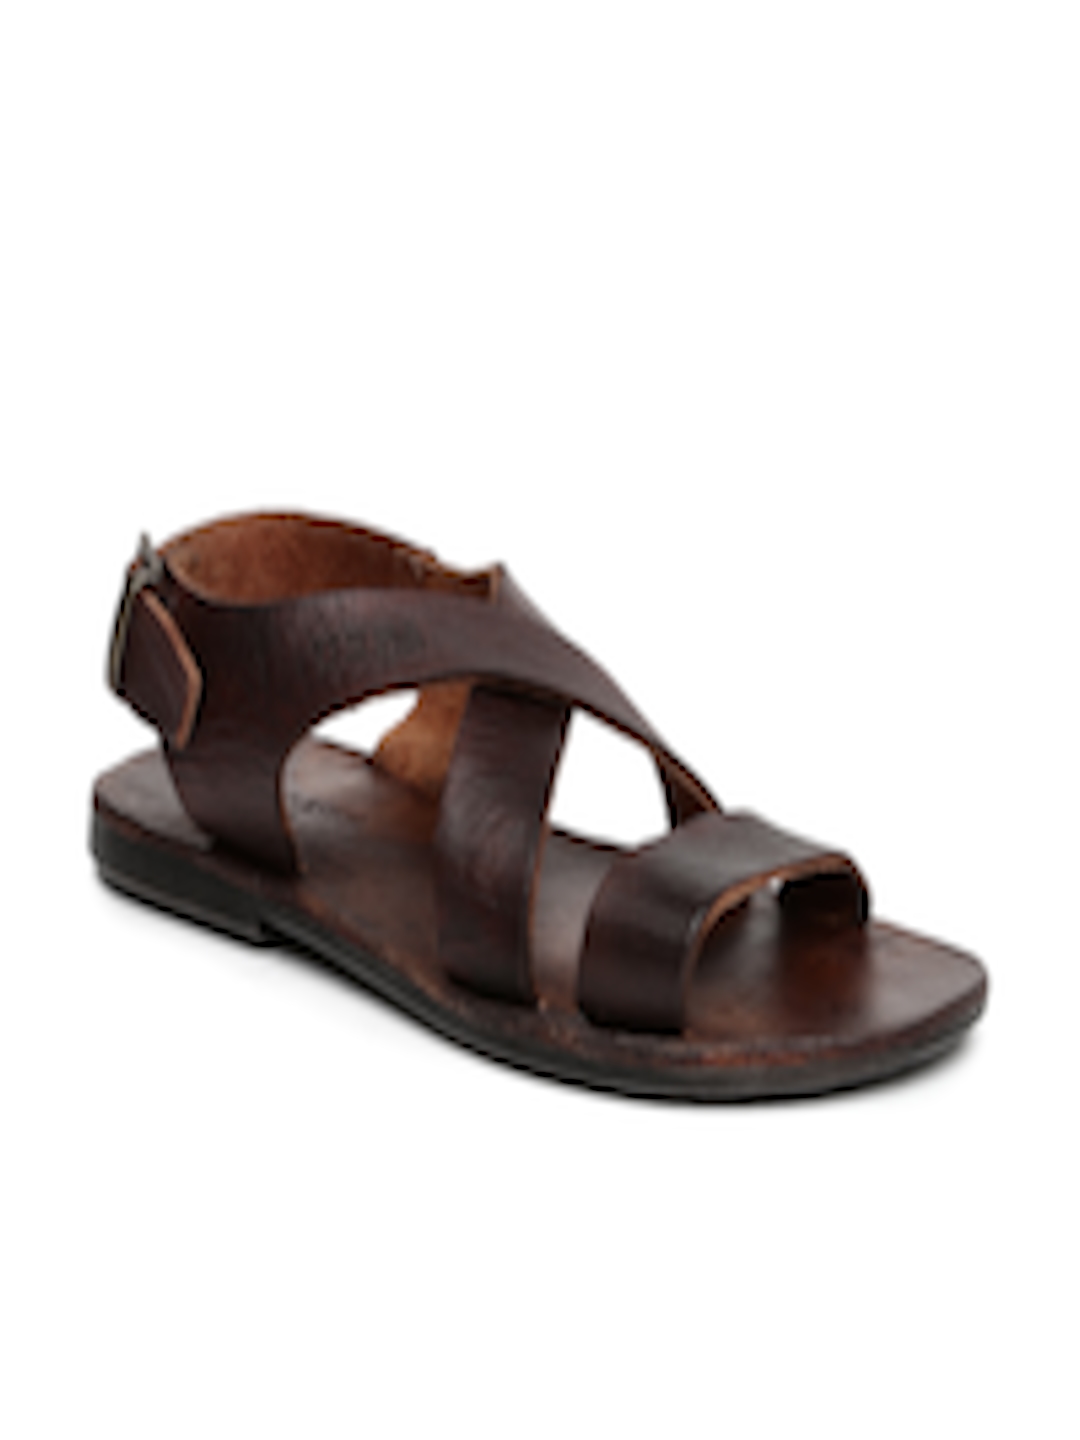 Buy U S Polo  Assn Men  Brown  Genuine Leather Sandals  